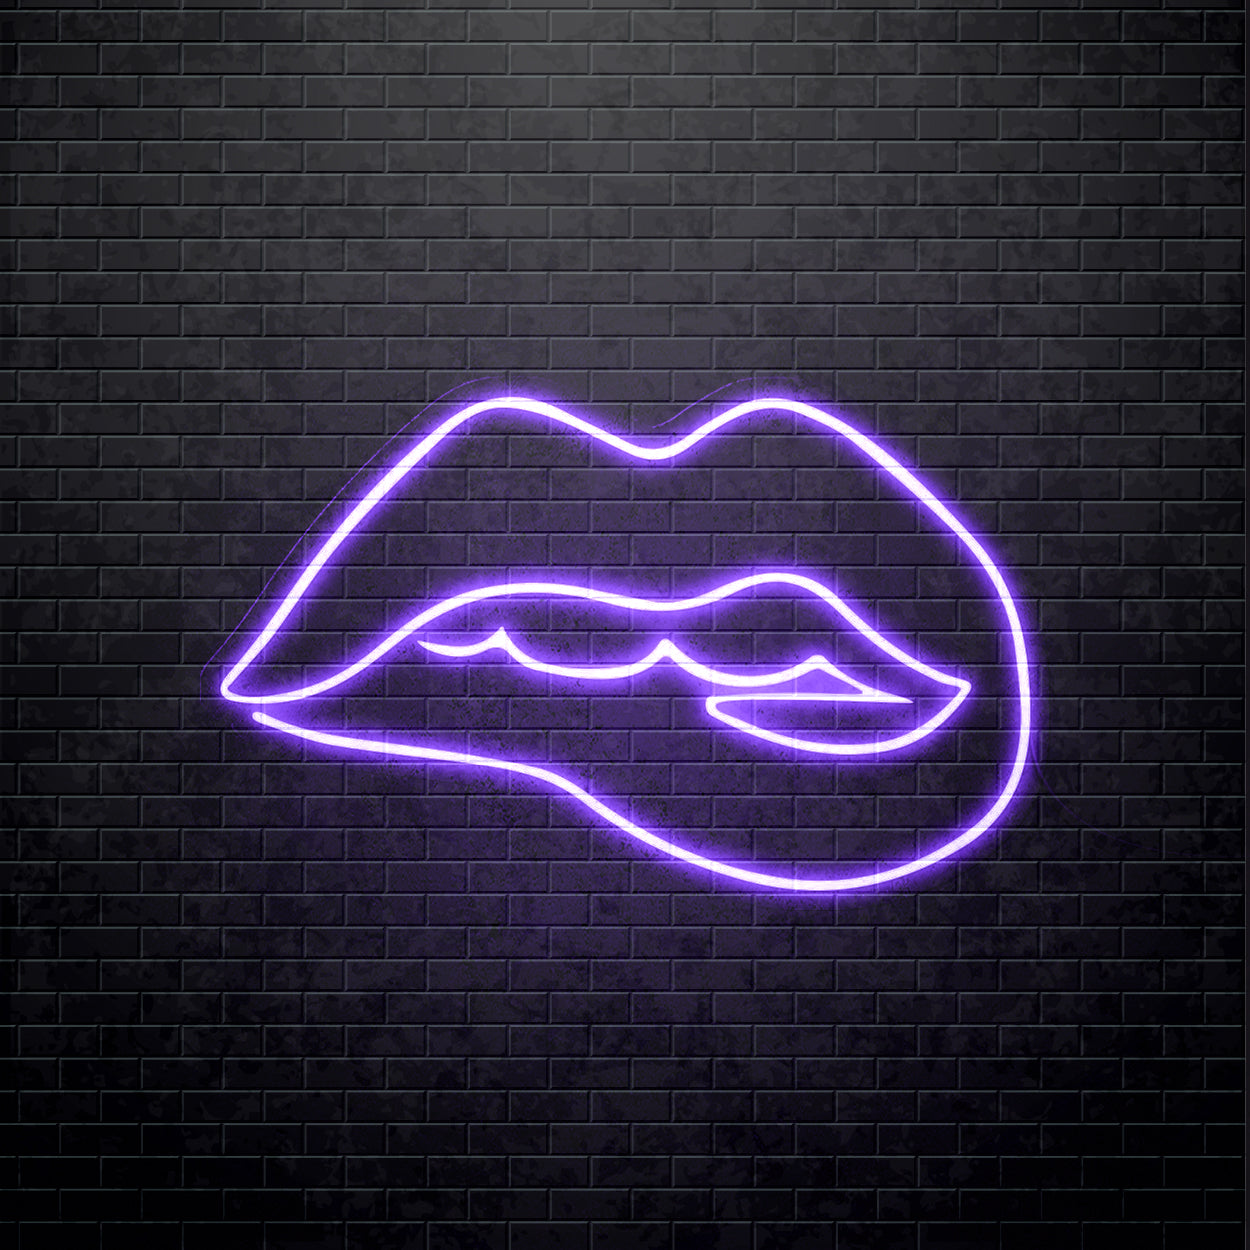 LED Neon sign - Lips